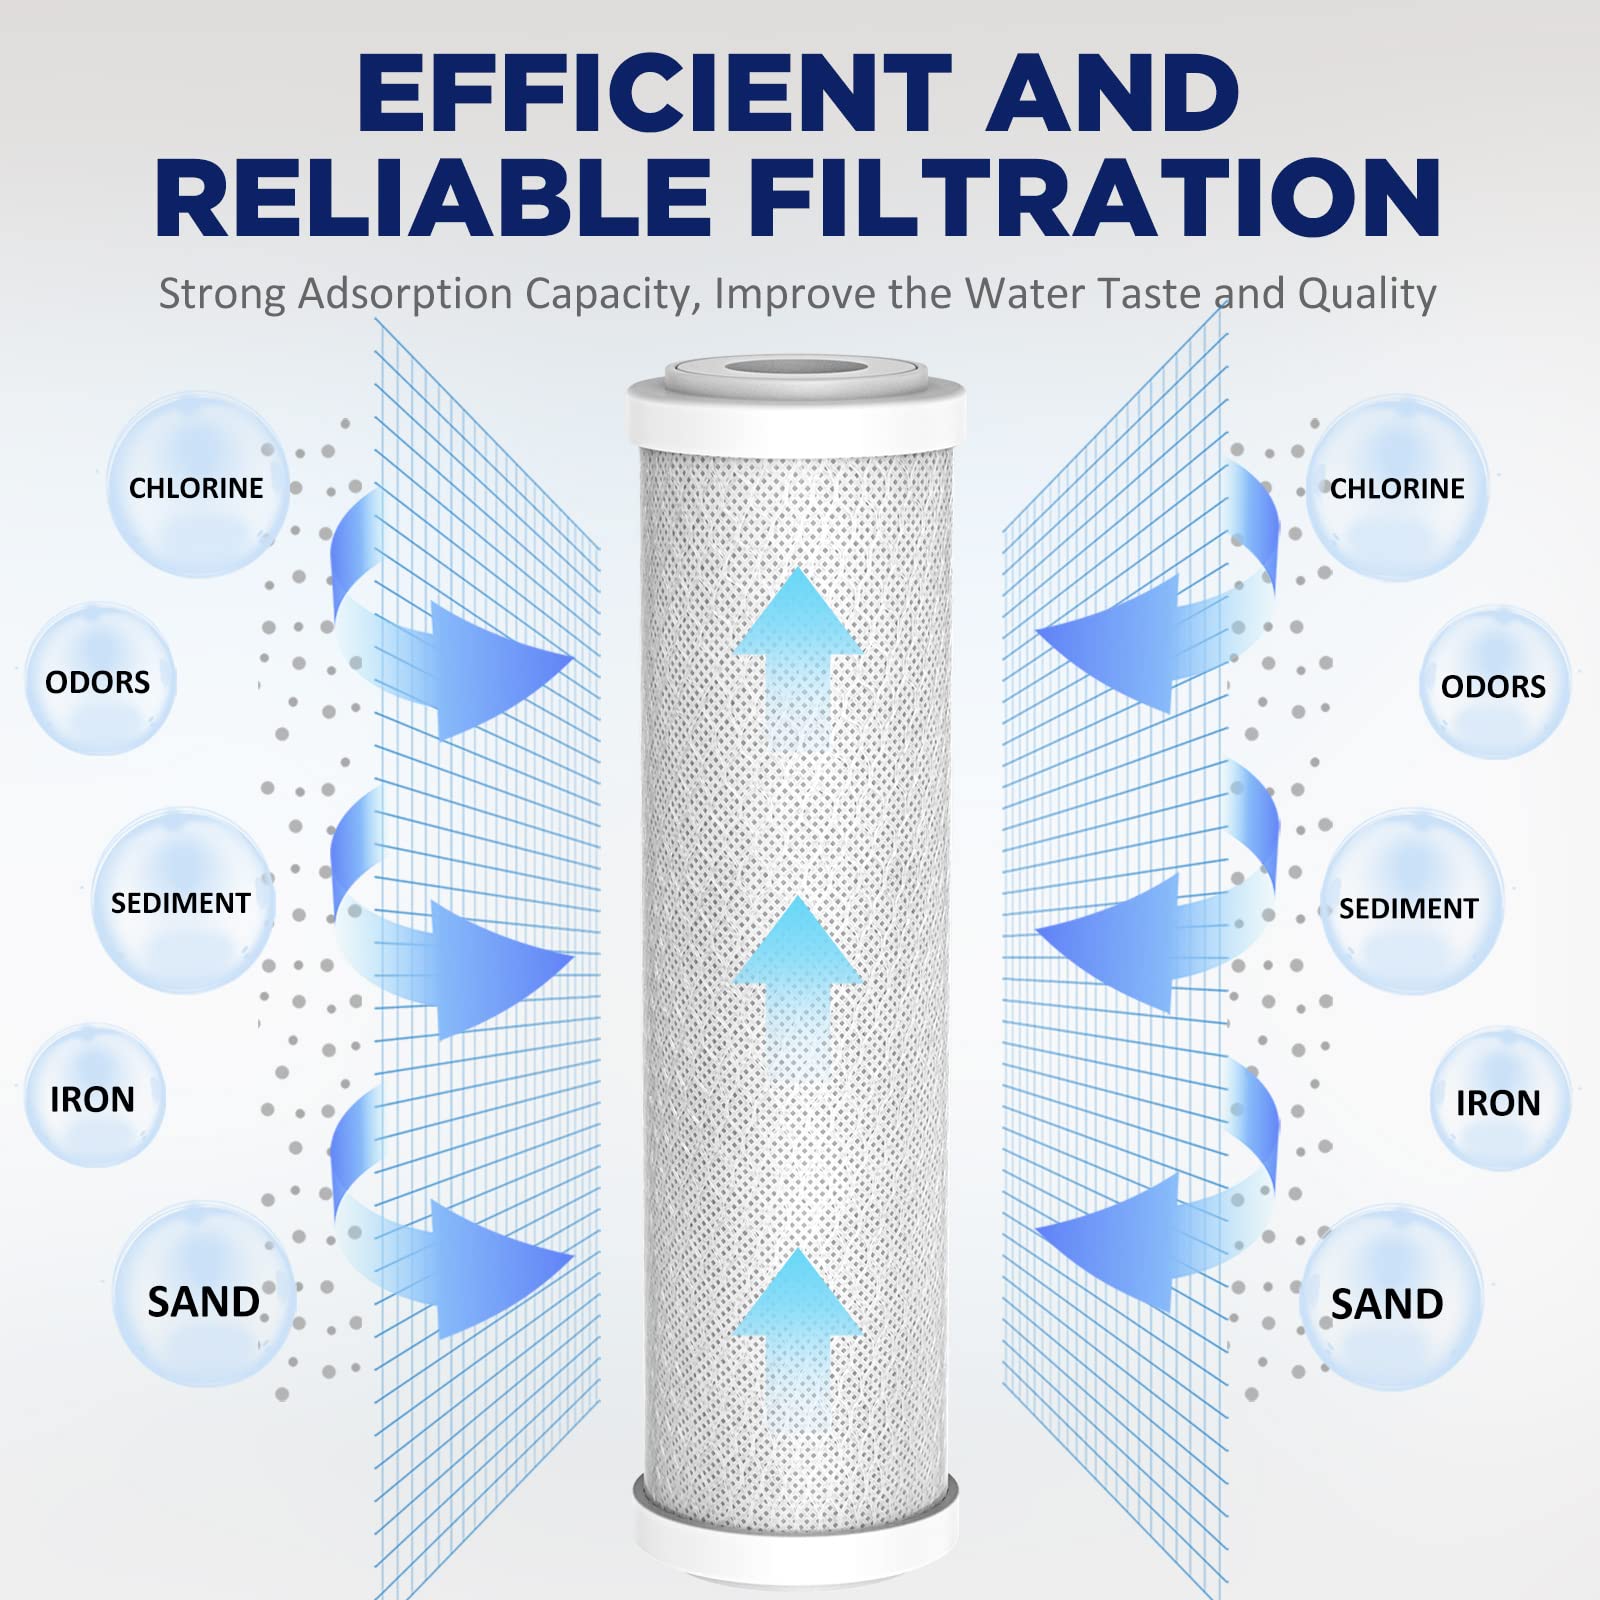 5 Micron Grooved Sediment & 5 Micron CTO Carbon Block Water Filter 10"x2.5", Whole House Water Filters Universal Replacement Filter Cartridge by Membrane Solutions